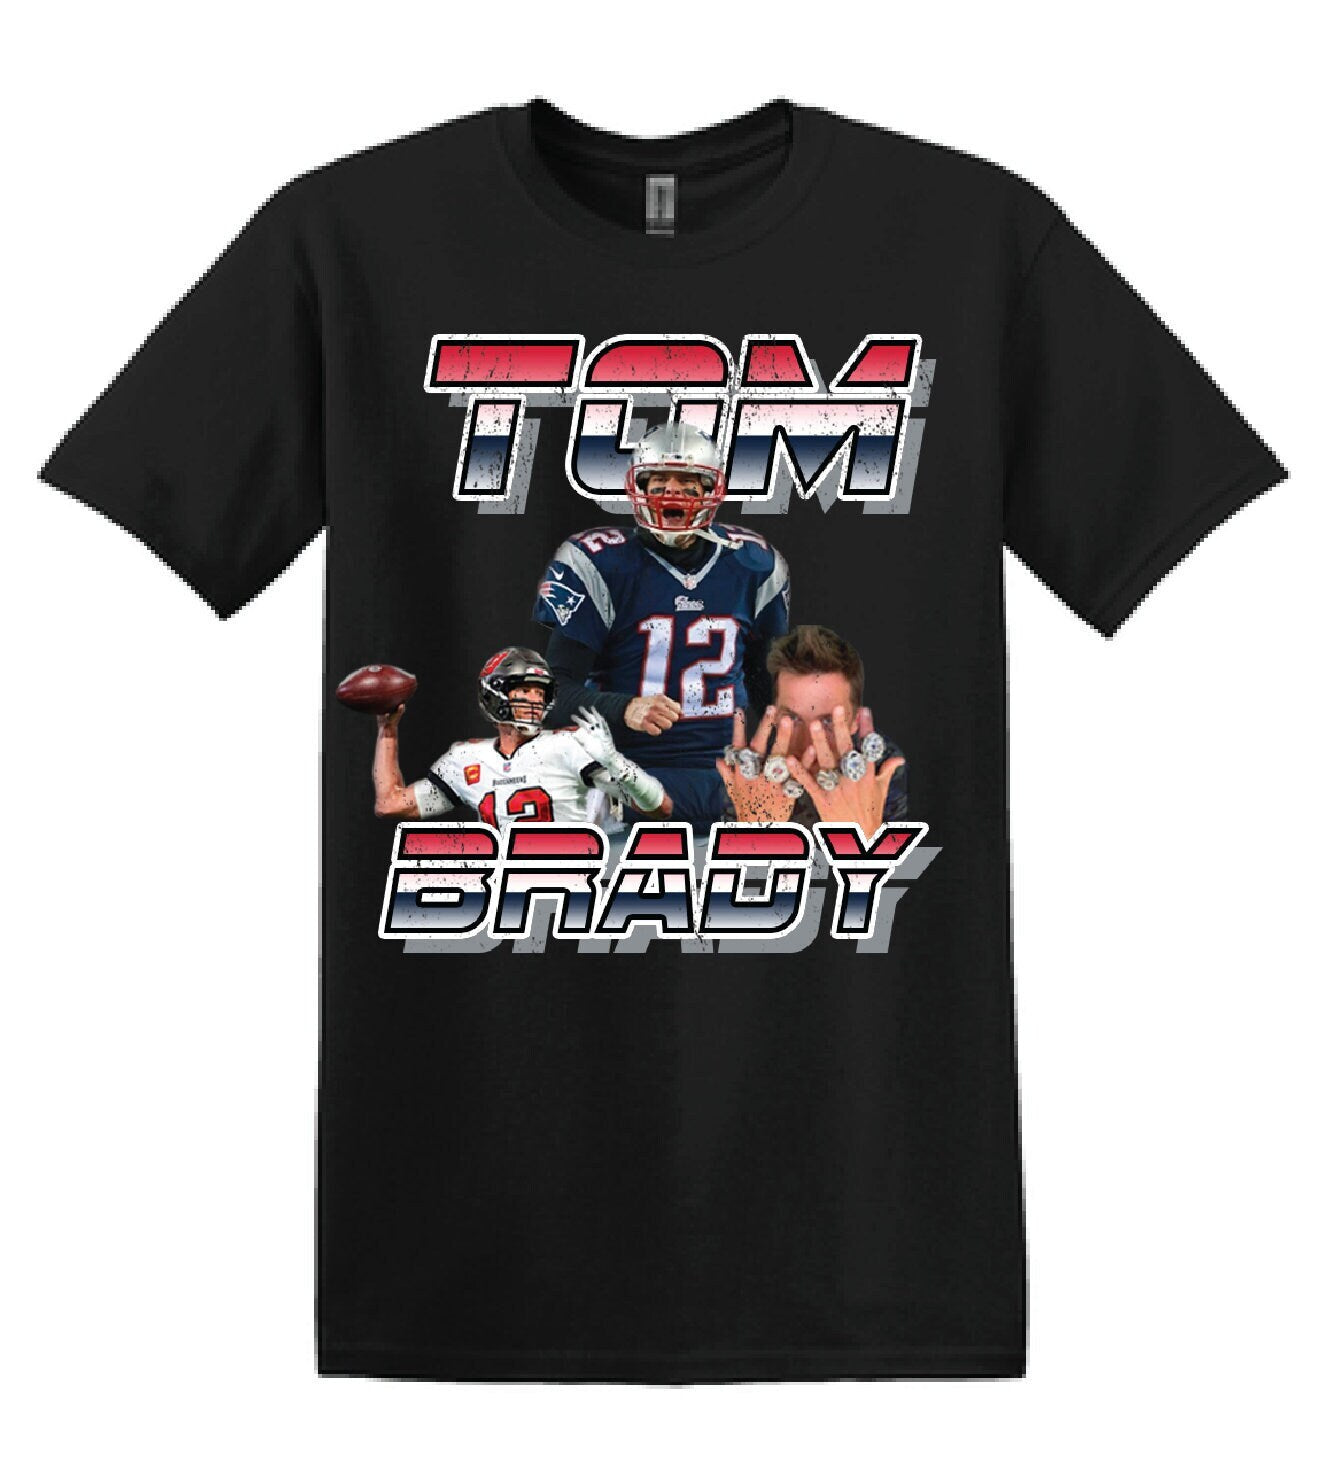 Tom Brady 90's Bootleg Vintage Style T-shirt - Throwback Tribute to the GOAT